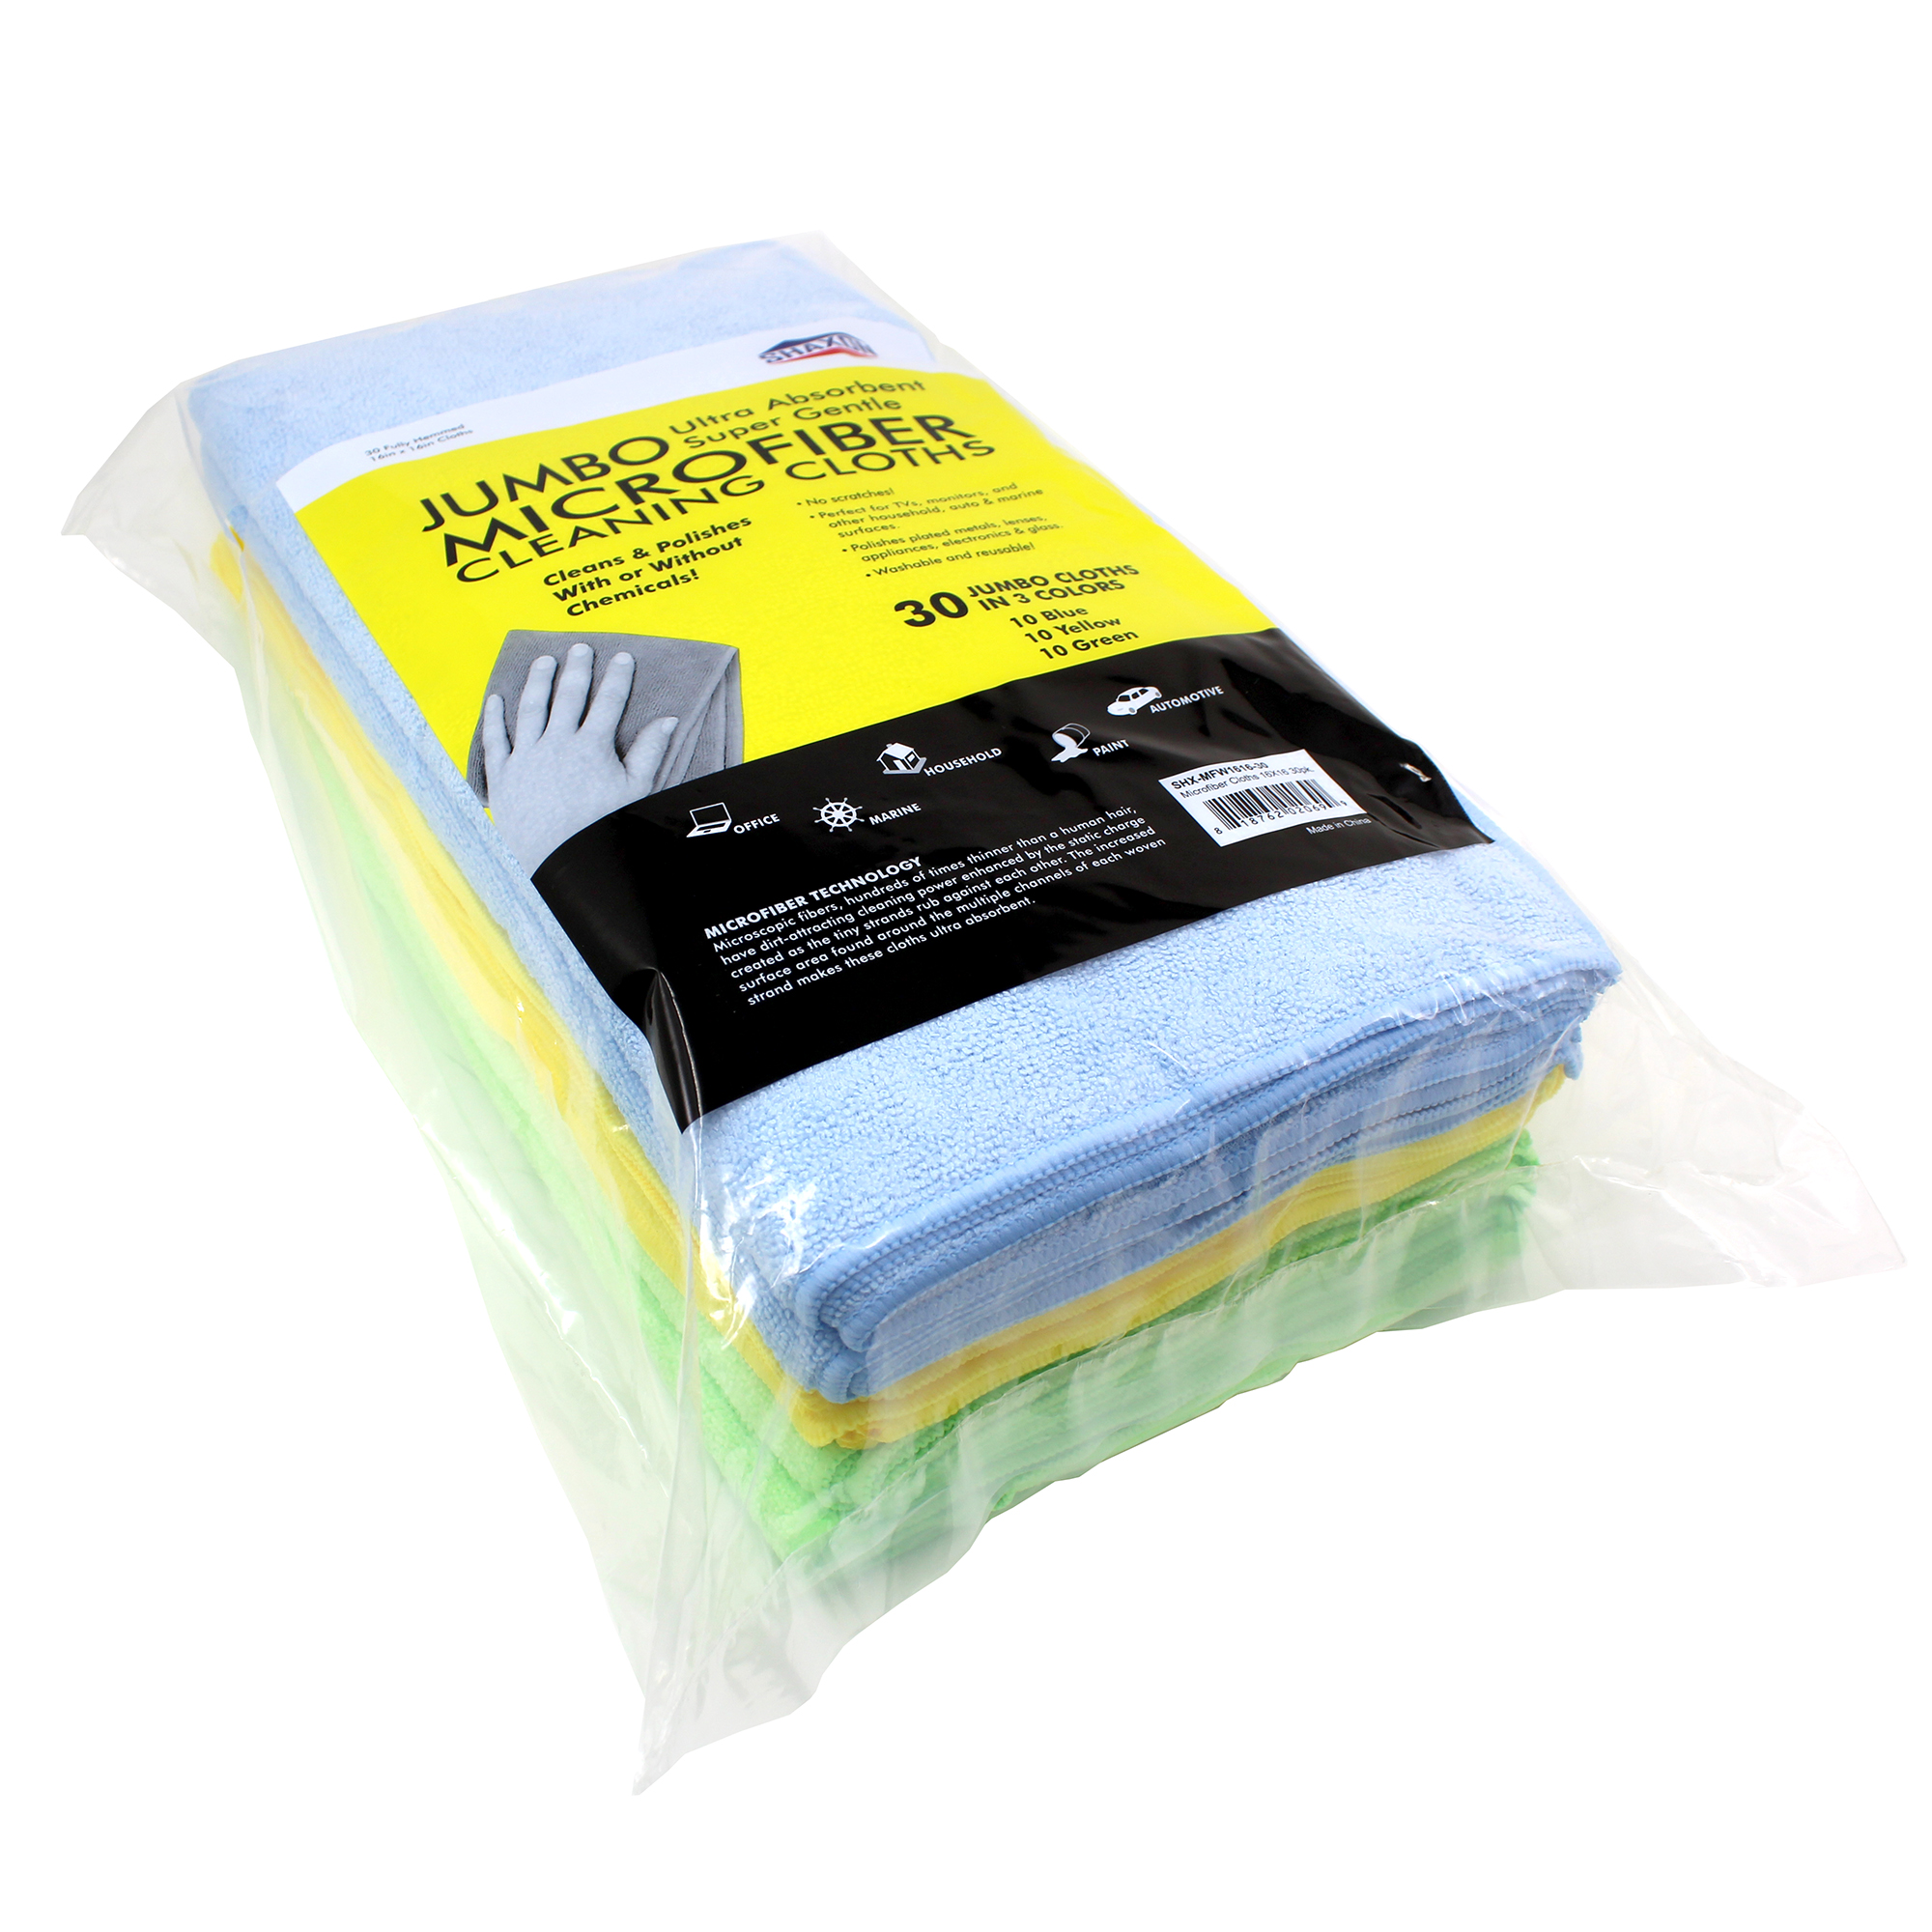 Microfiber Cleaning Cloths, 30 Piece per Pack